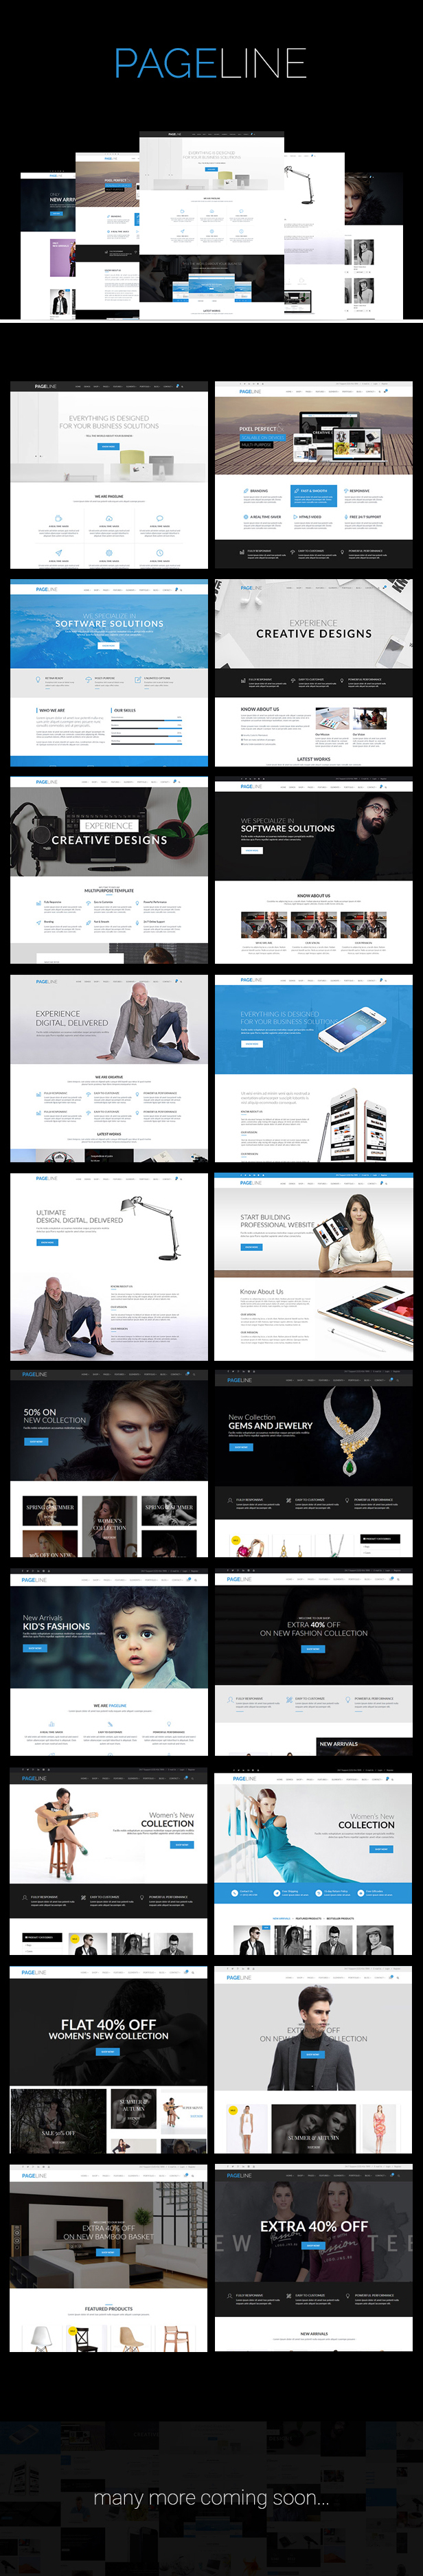 PageLine - Bootstrap Based Multi-Purpose HTML5 Drupal 8.7 Theme - 1